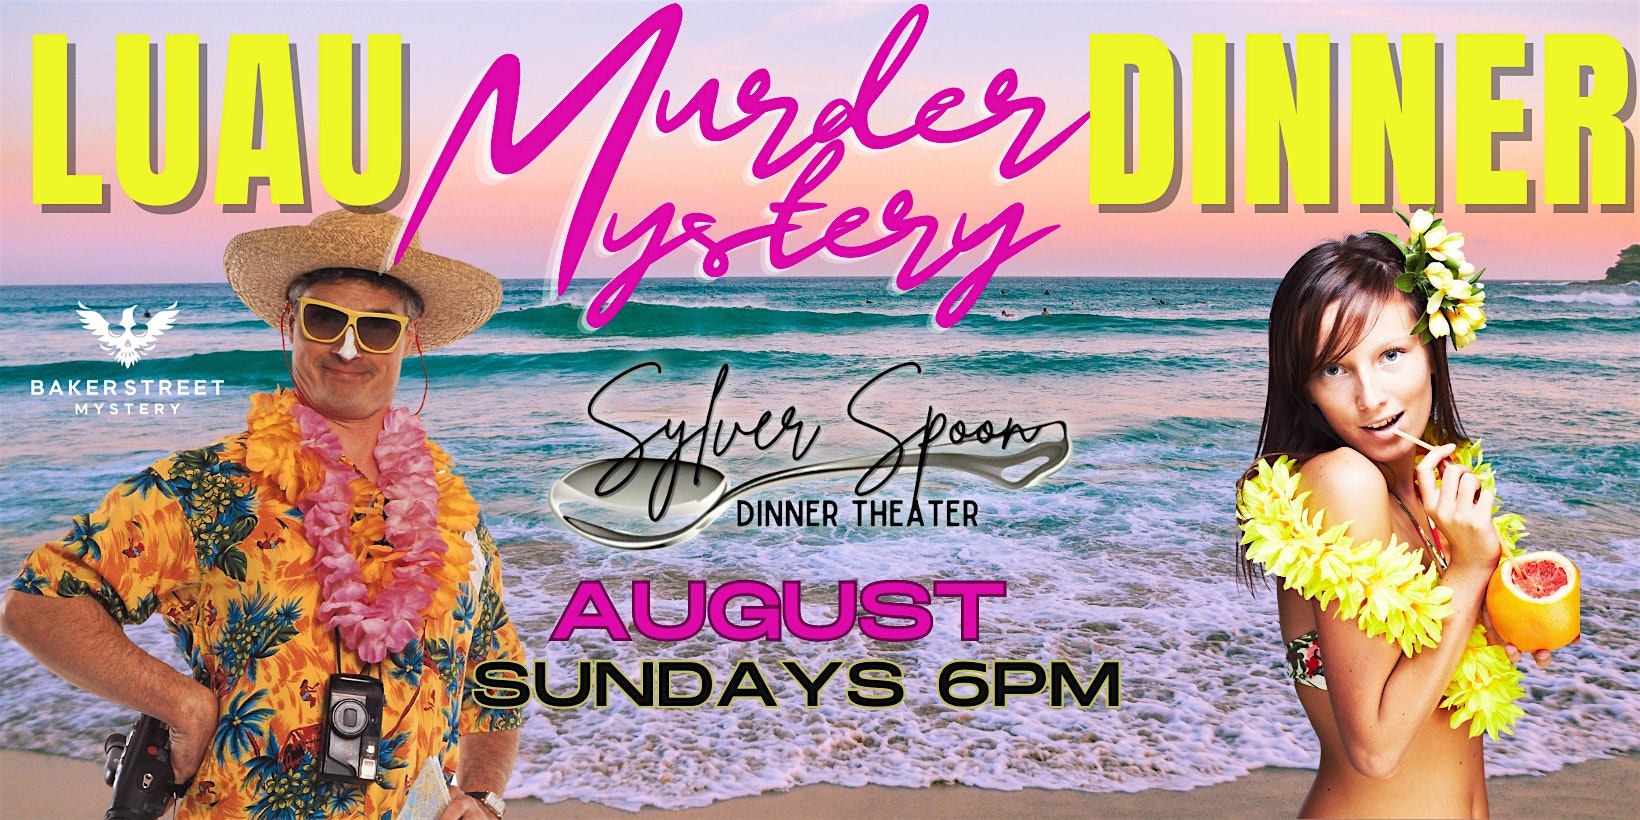 Aloha-micide M**der at the Luau!  A Sylver Spoon M**der Mystery Dinner